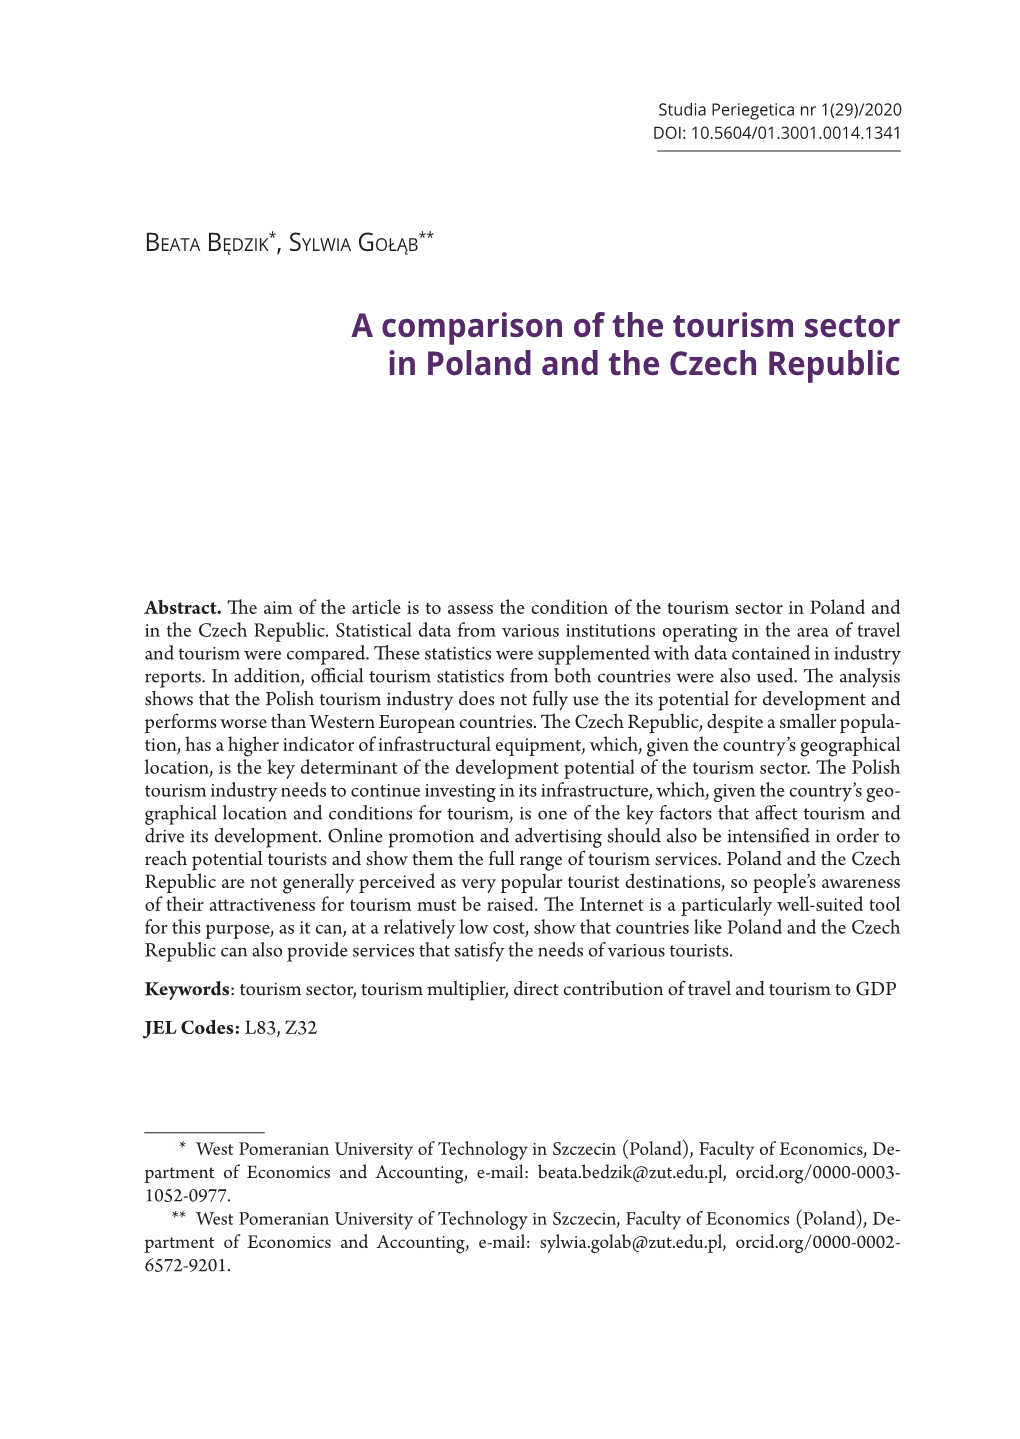 A Comparison of the Tourism Sector in Poland and the Czech Republic